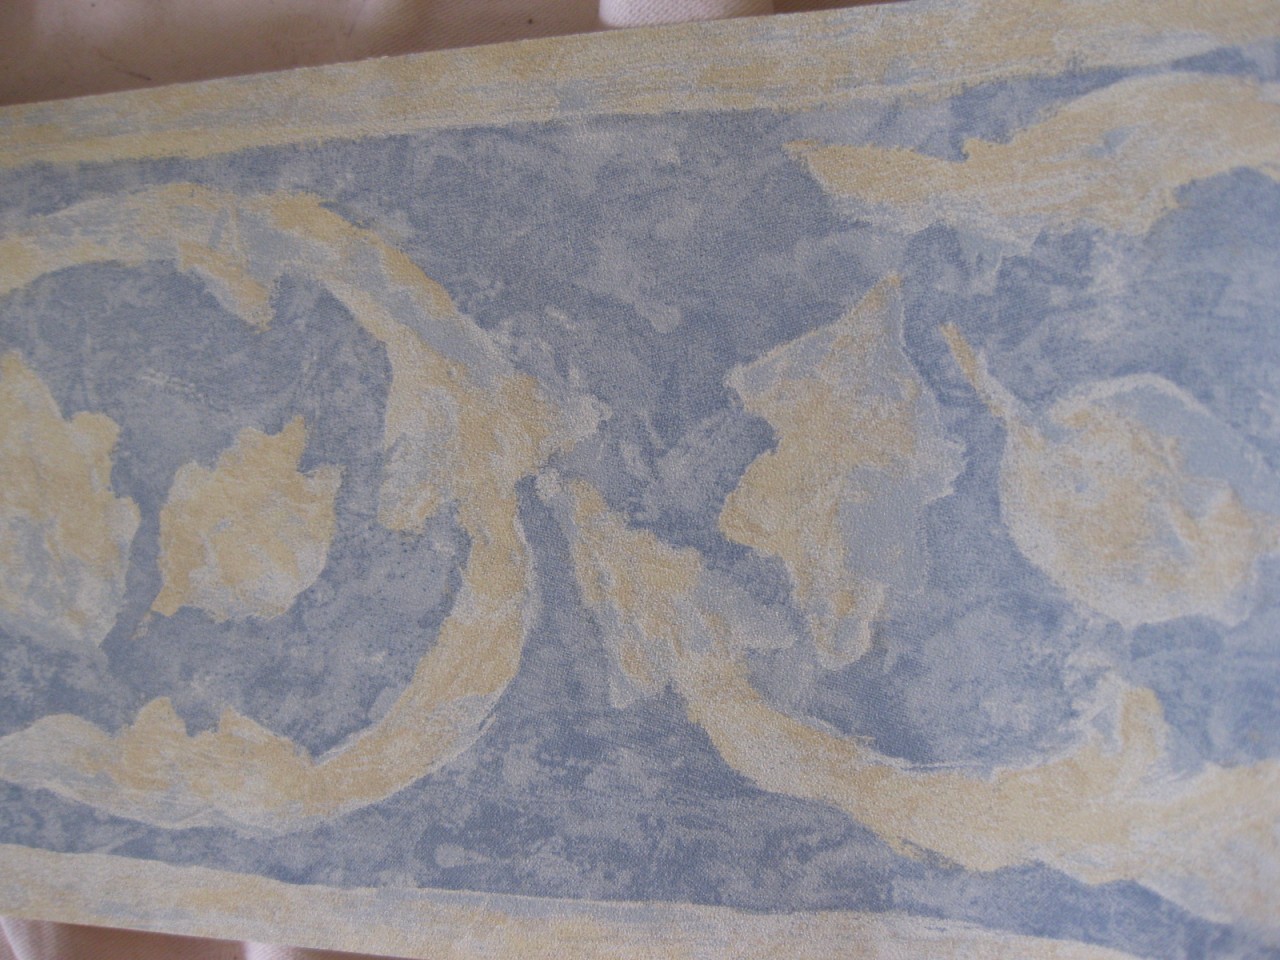 Details About Altair Blue Cream Quality Vymura Wallpaper Borders Bn